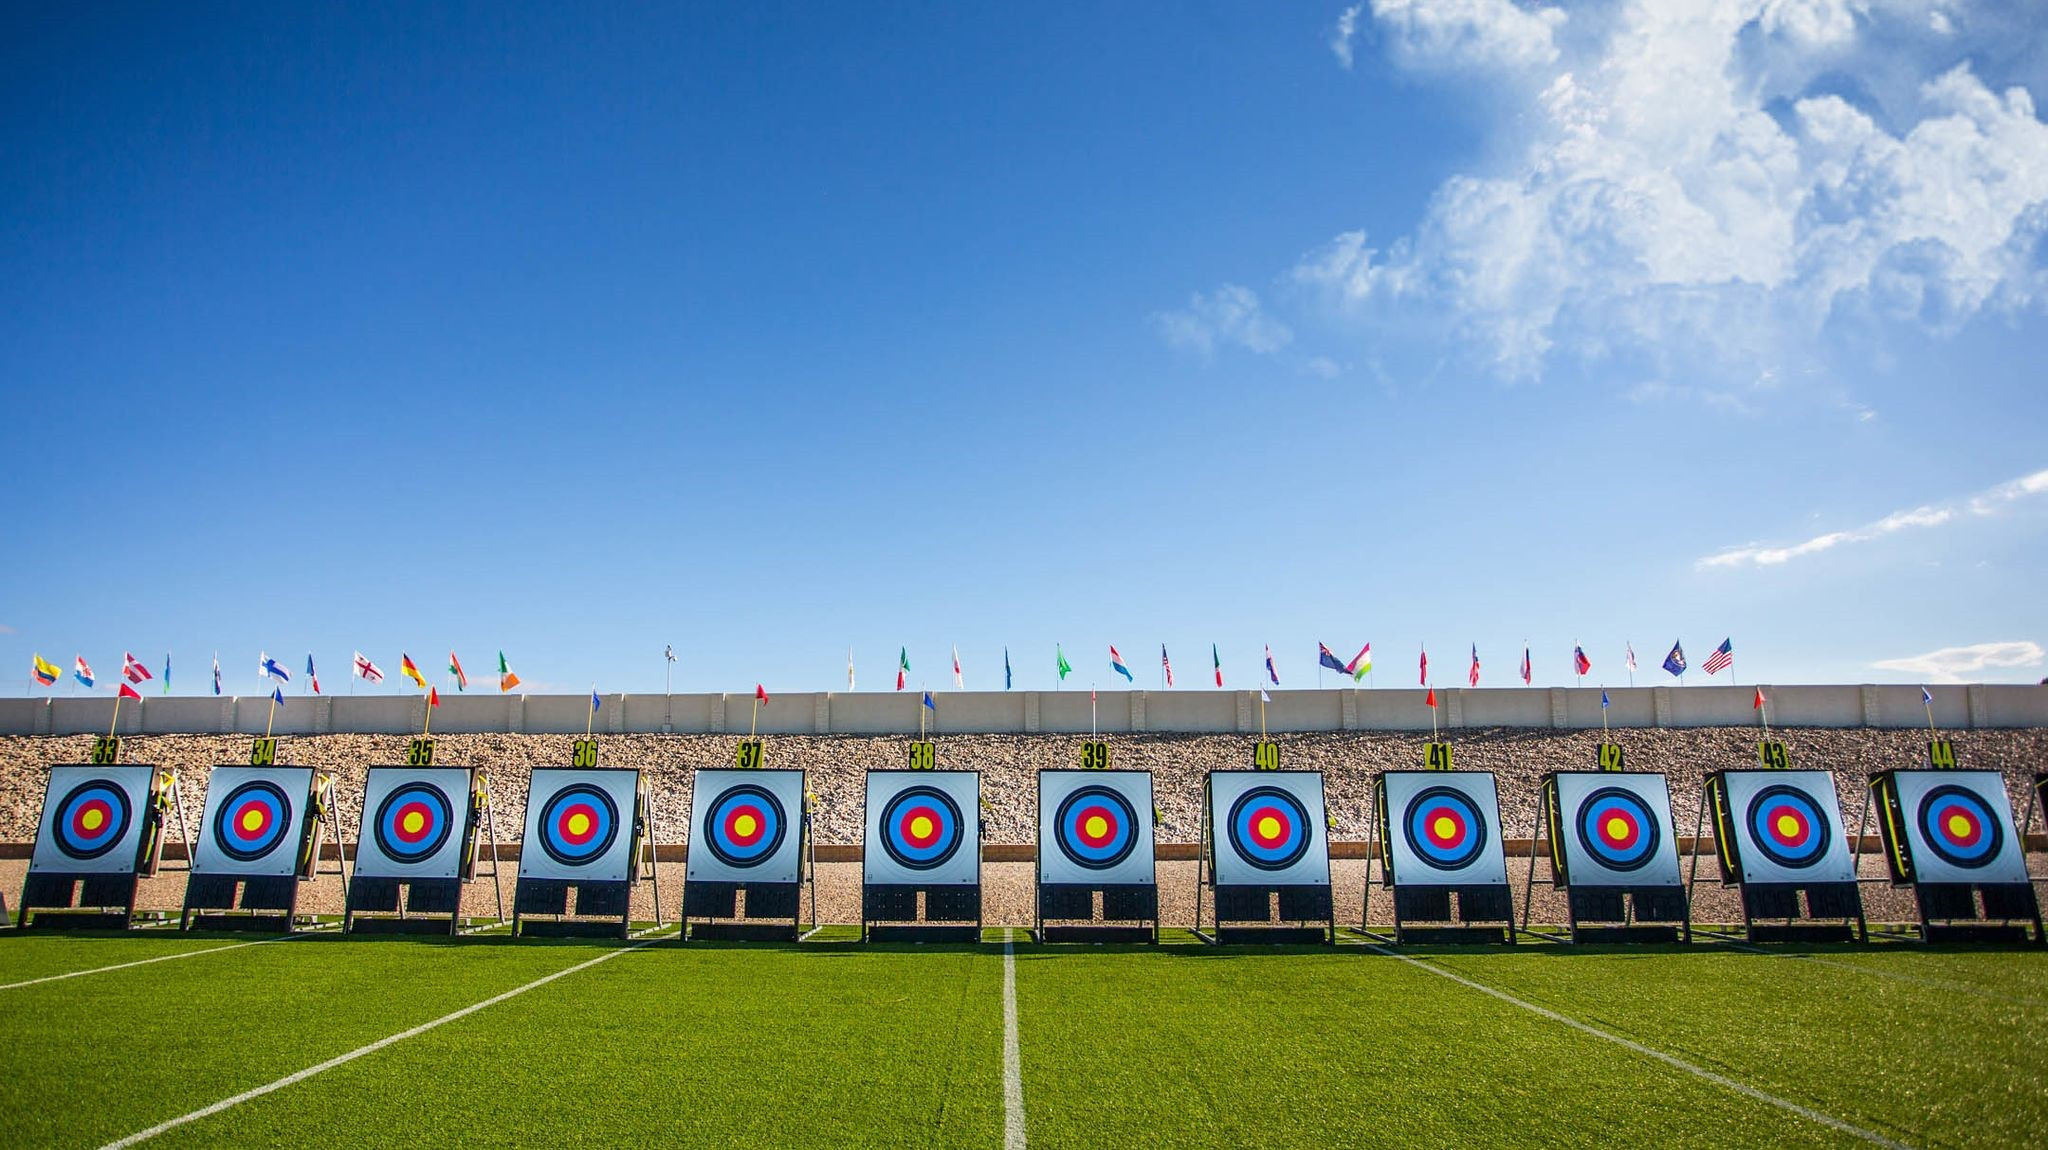 World Archery has extended its partnership agreement with target manufacturer Rinehart for two years ©World Archery 